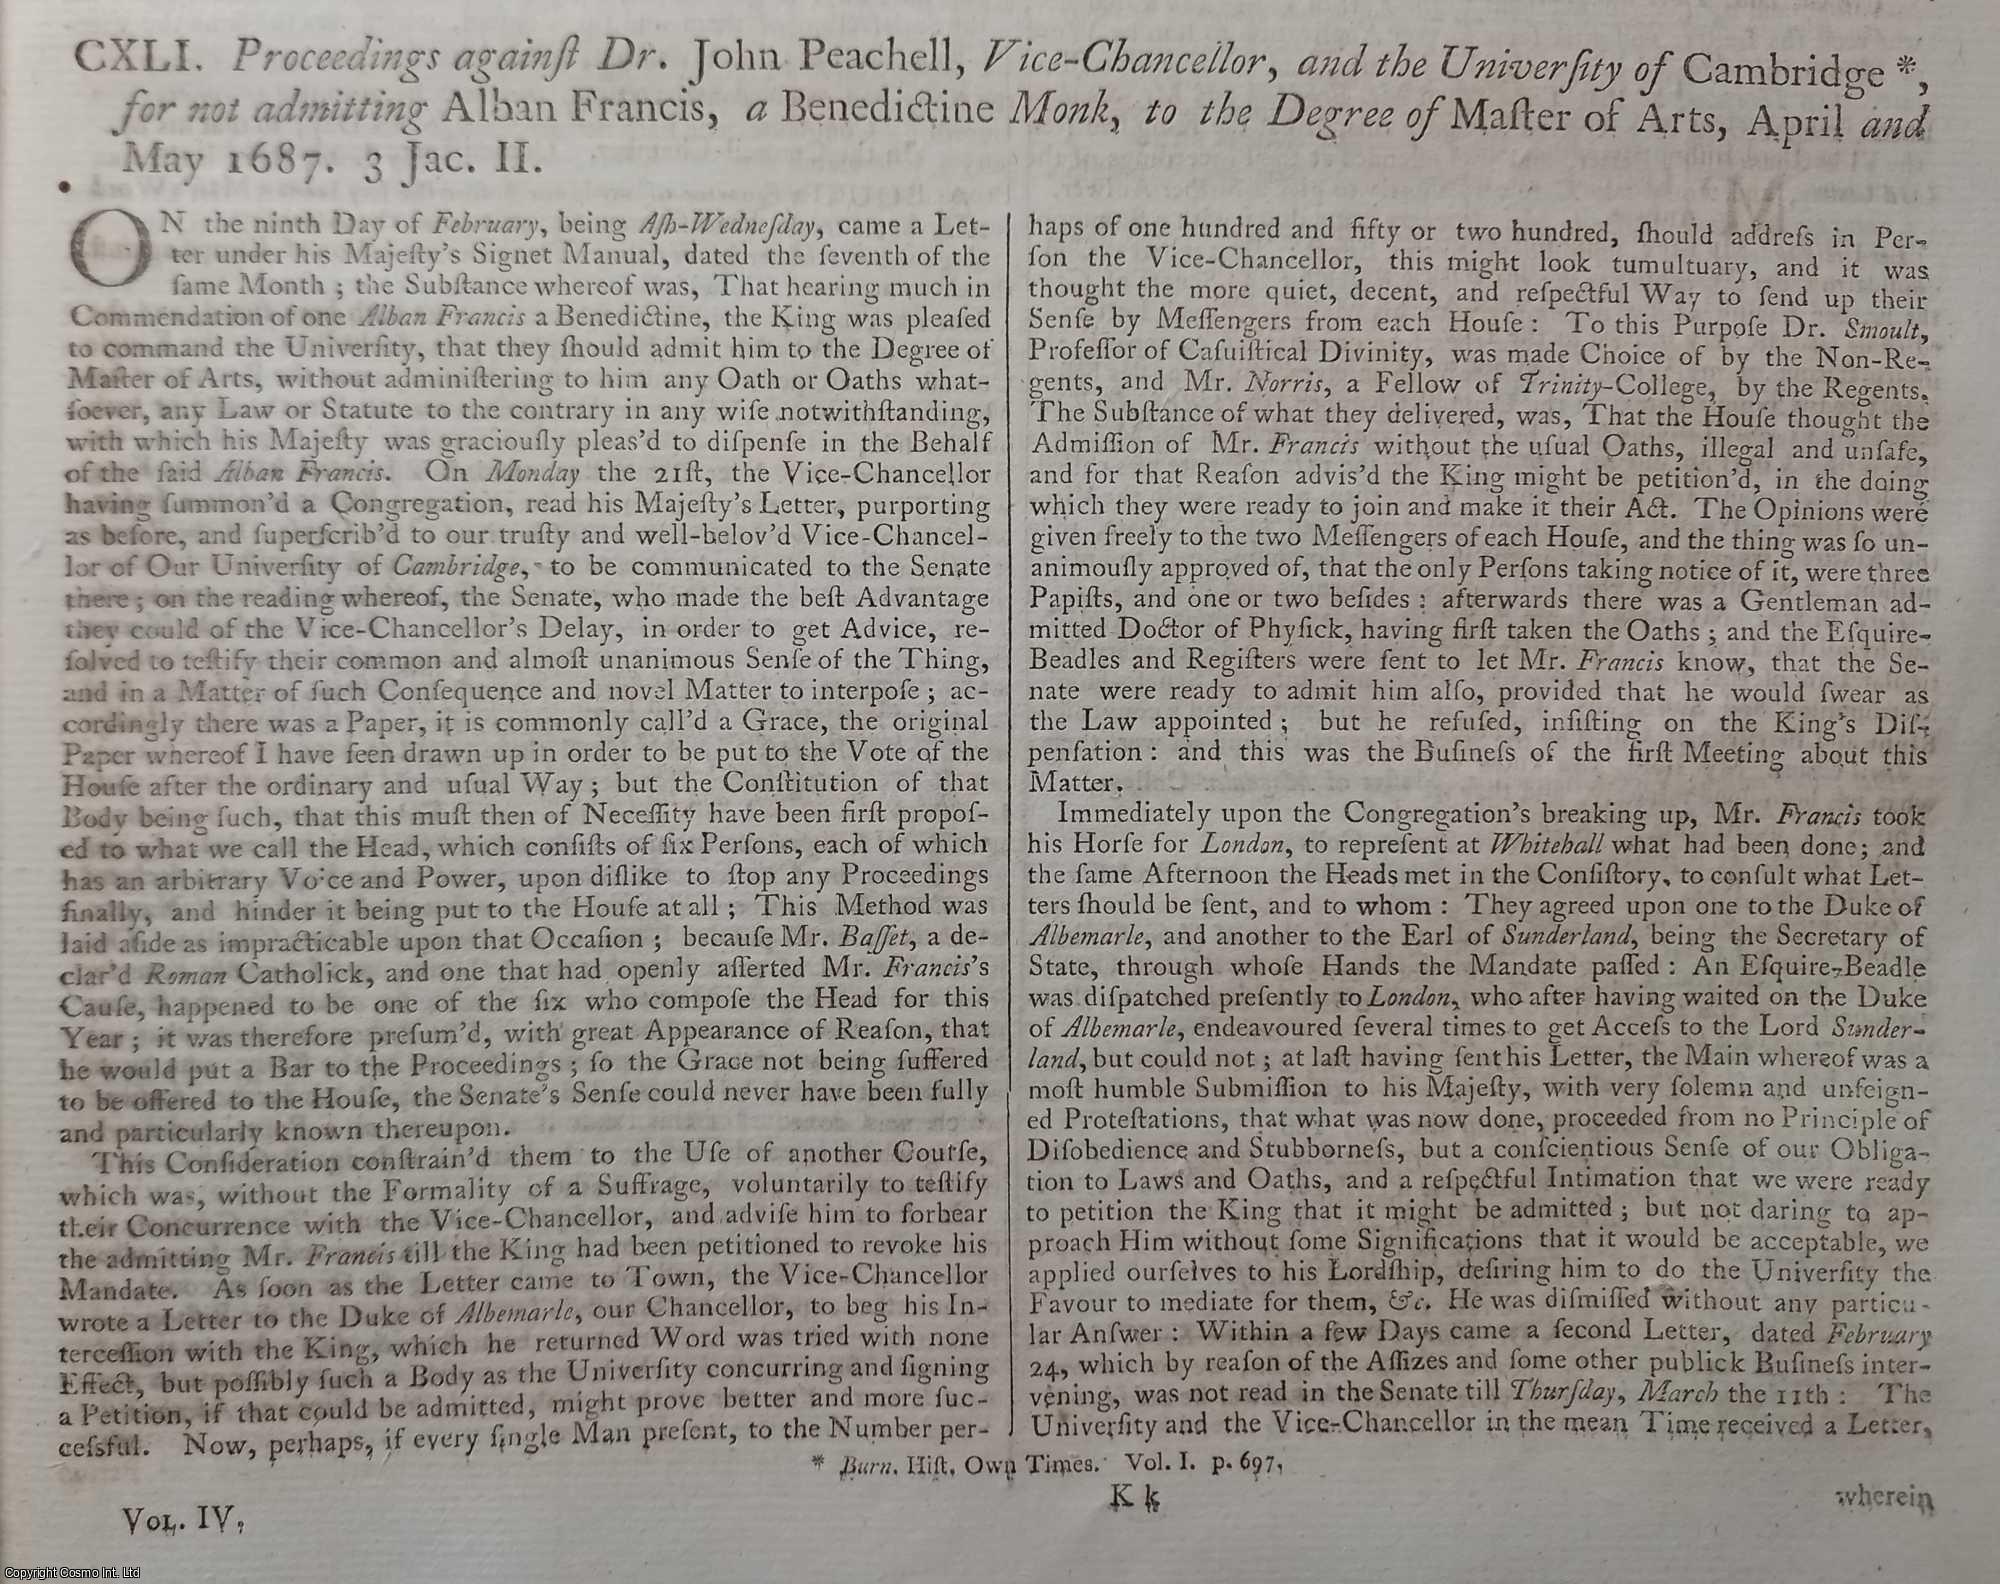 [Trial] - Proceedings against Dr. John Peachell, Vice-Chancellor, and the University of Cambridge, for not admitting Alban Francis, a Benedictine Monk, to the Degree of Master of Arts, April and May 1687. TOGETHER WITH Proceedings against St. Mary Magdalen College in Oxon. for not Electing Anthony Farmer President of the said College, June &c, 1687. An original article from the Collected State Trials.